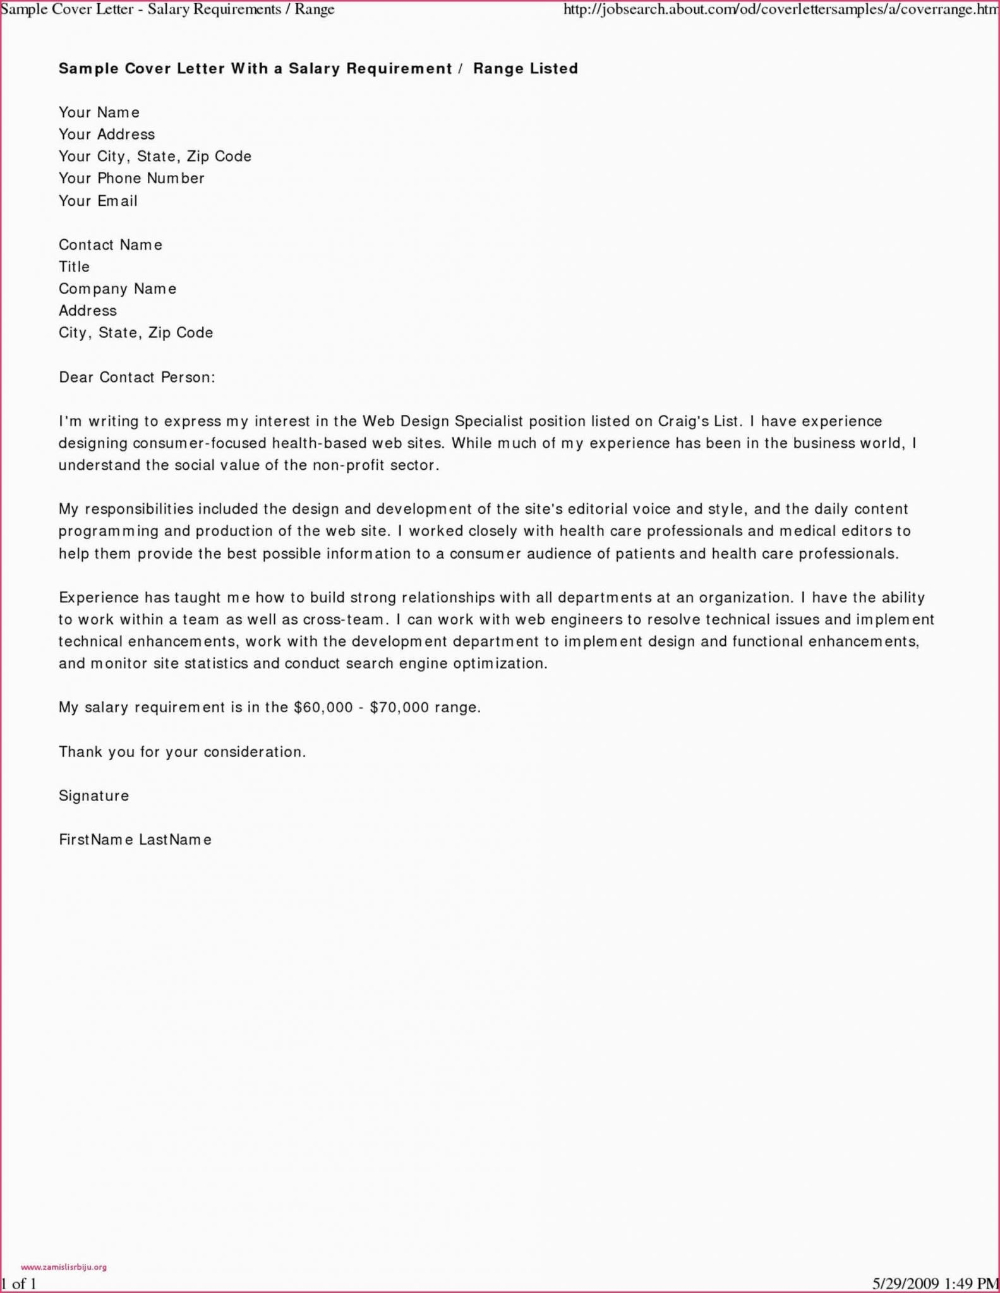 Sample Letter Requesting Sales Tax Exemption Certificate In Resale Certificate Request Letter Template